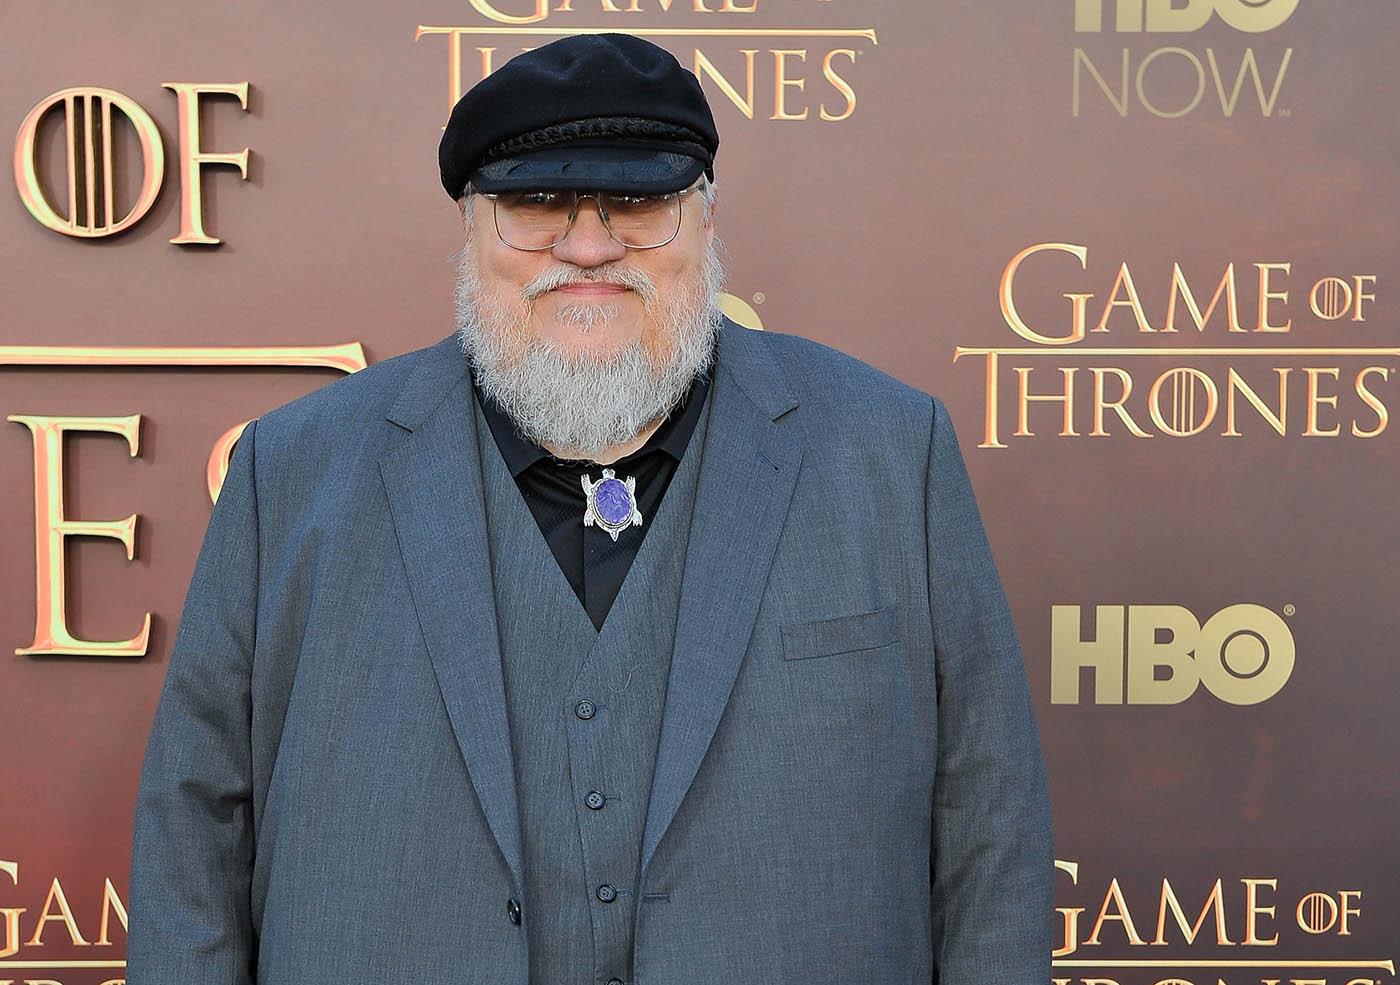 george R.R. Martin pose pour HBO et son oeuvre Game of Thrones (Trône de Fer)